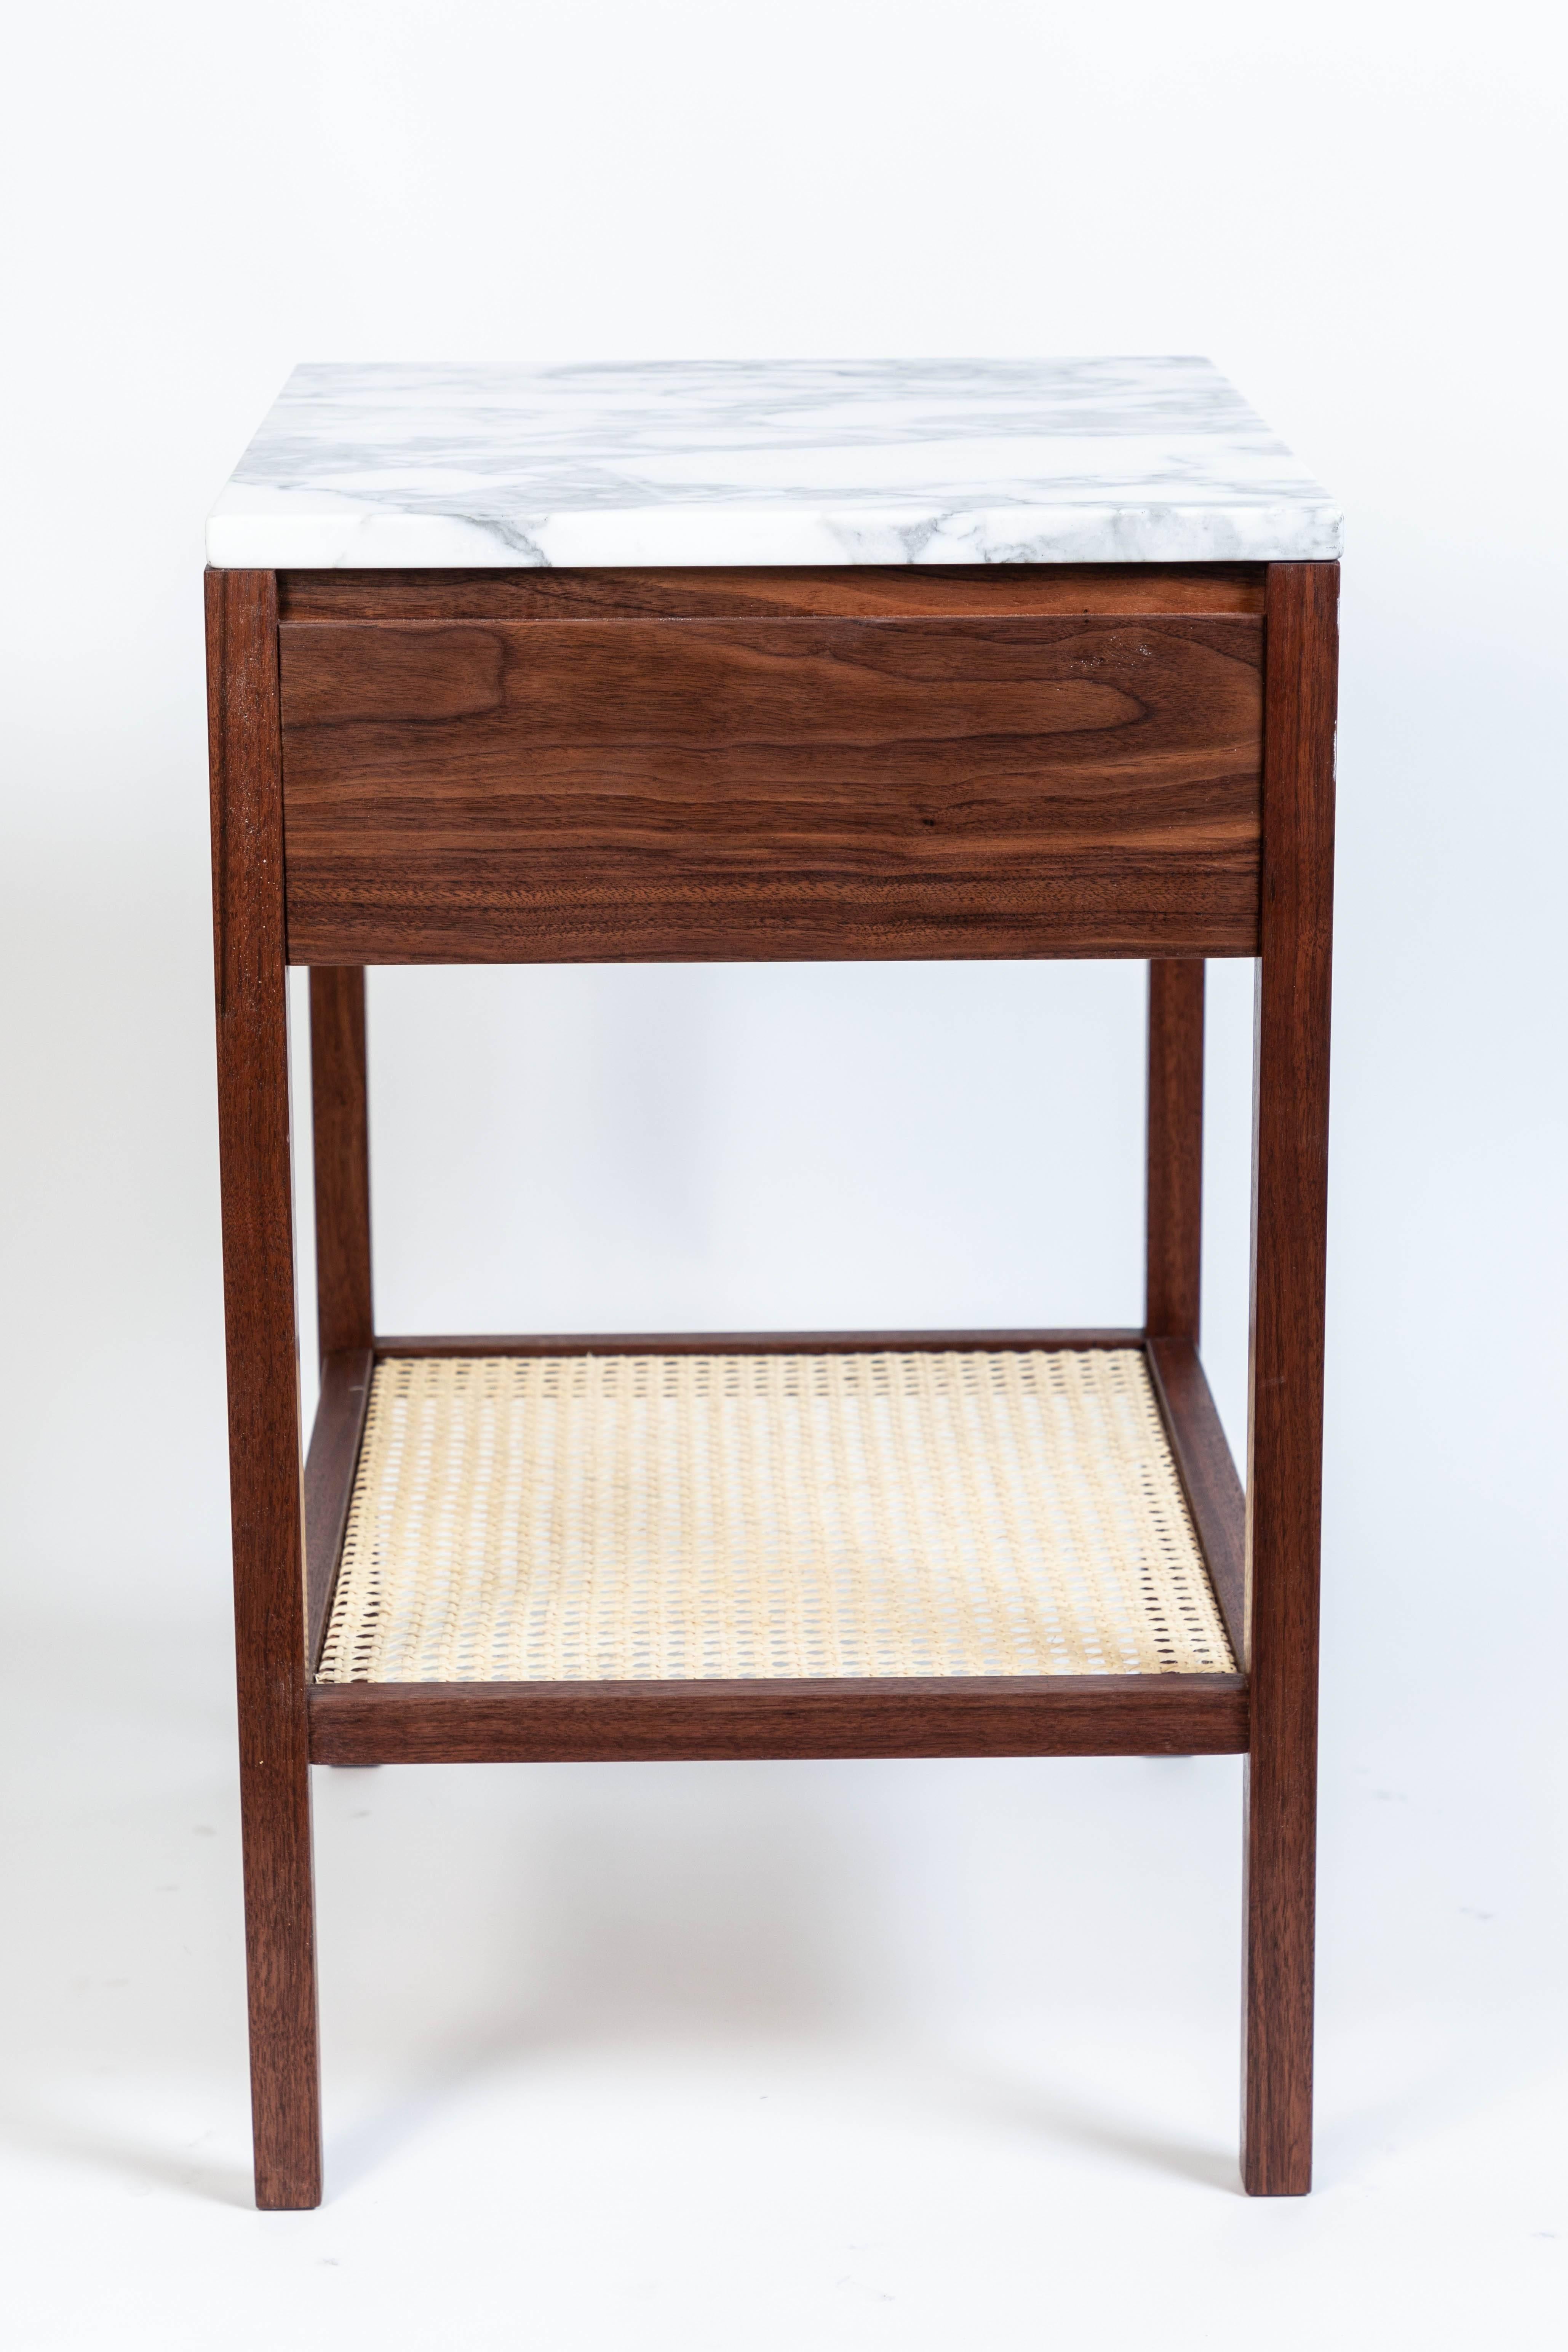 Made to Order Walnut Night Stand with a Marble Top and Caned Bottom Shelf  1